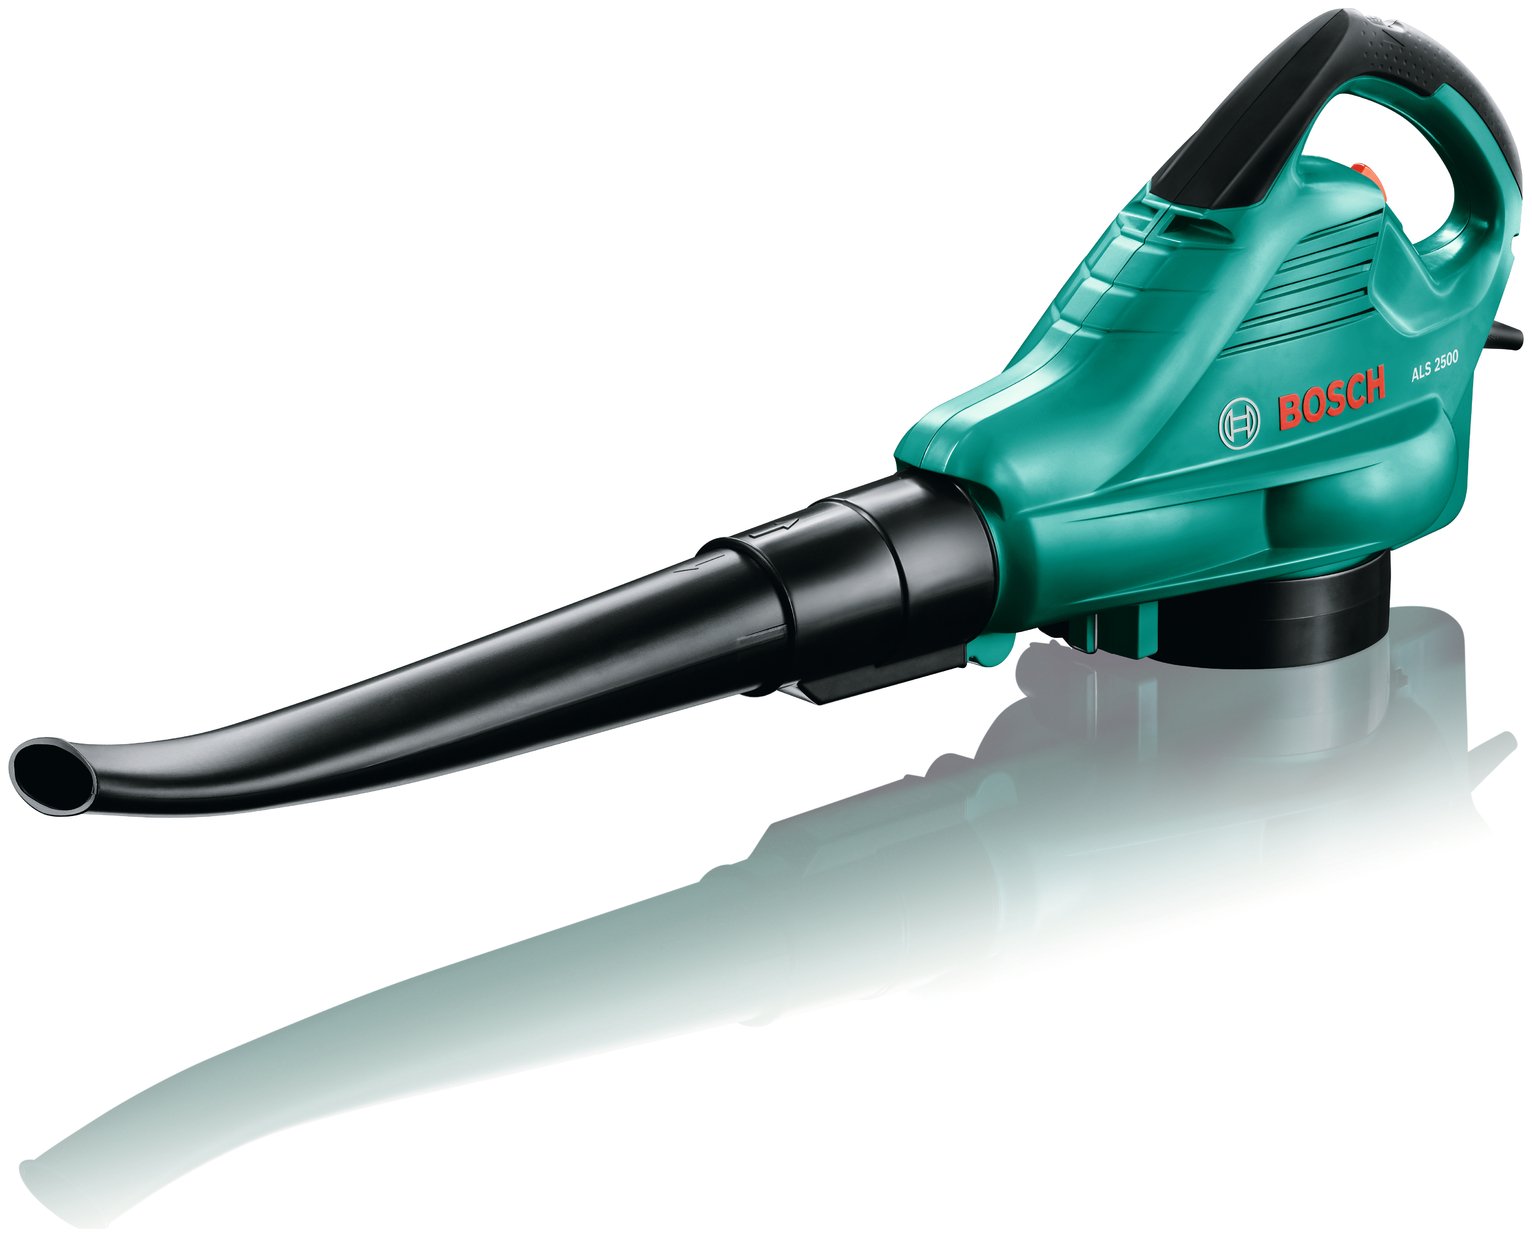 Bosch ALS2500 Corded Leaf Blower and Vac review